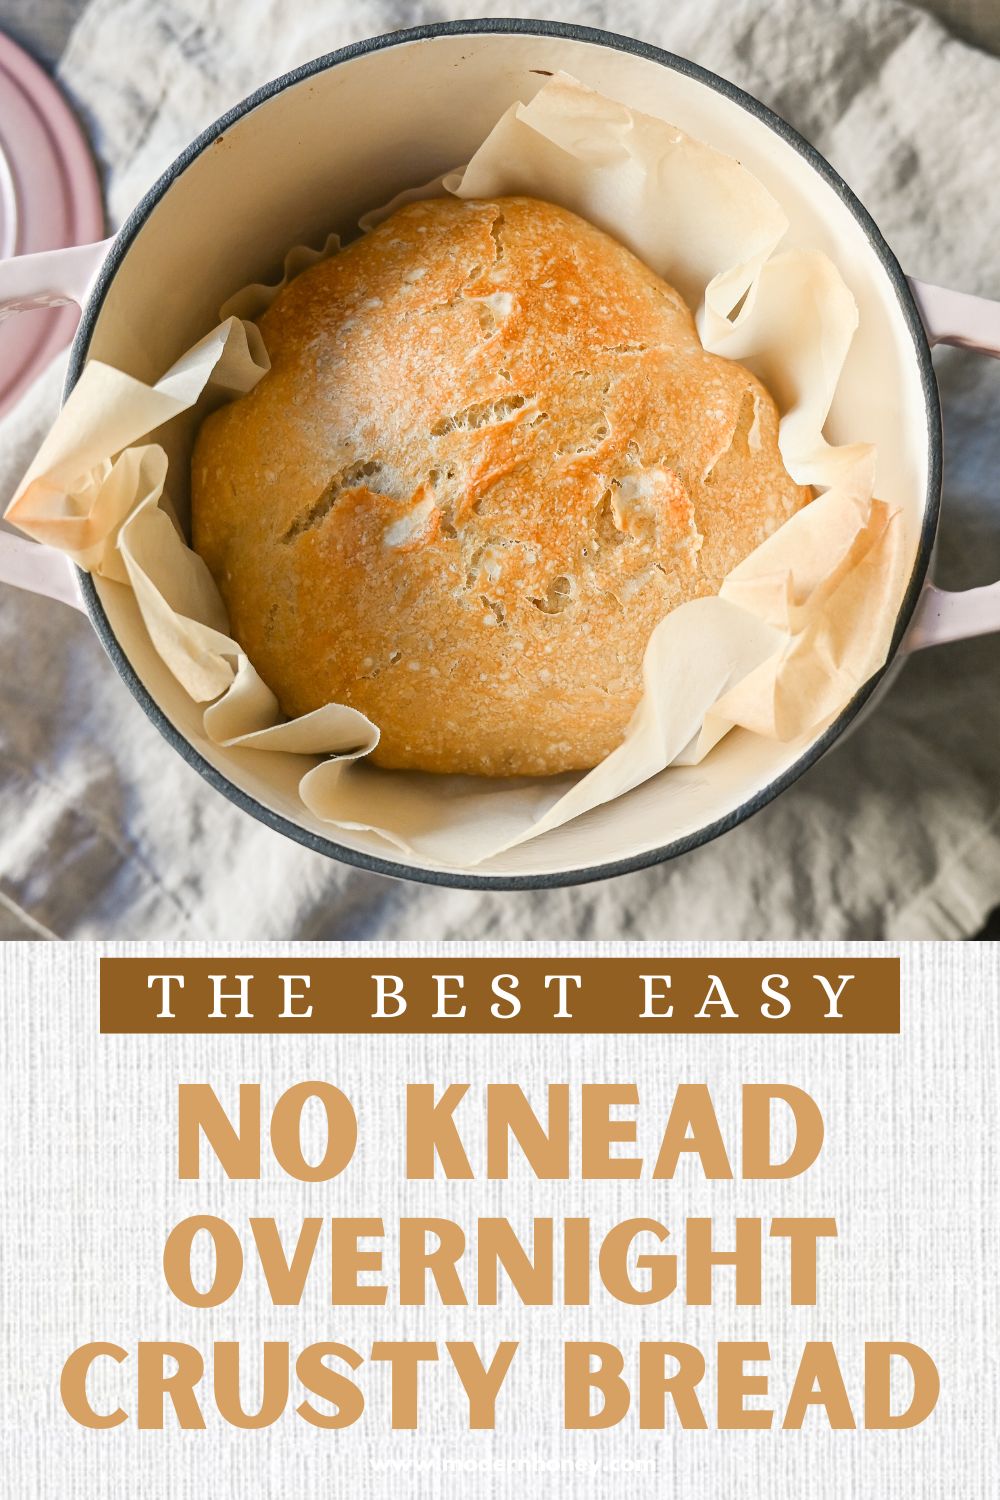 No Knead Overnight Crusty Bread Recipe. This No Knead Bread is baked in a dutch oven and is the perfect crusty french bread recipe. This makes a beautiful artisan loaf of bread and is so easy! The only ingredients you need are flour, water, salt, and yeast for the perfect overnight crusty bread.